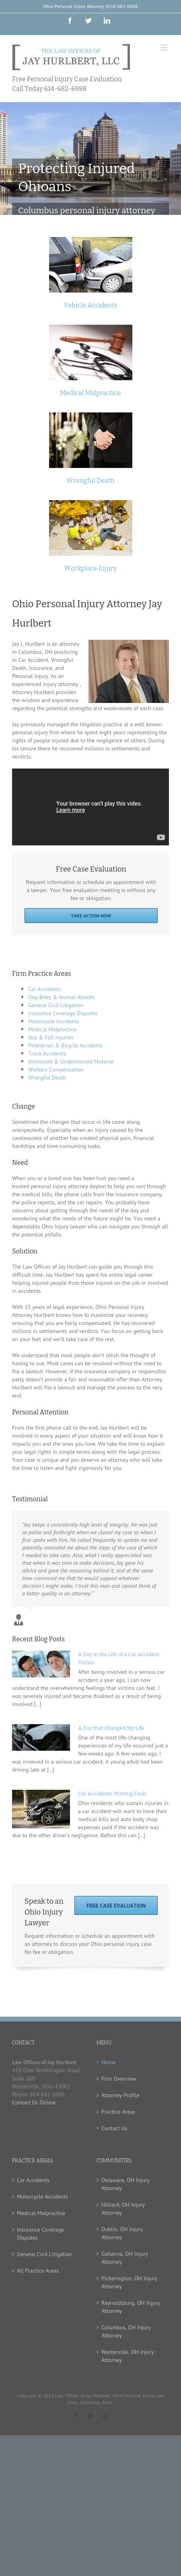 The Law Offices of Jay Hurlbert, LLC - Westerville OH Lawyers